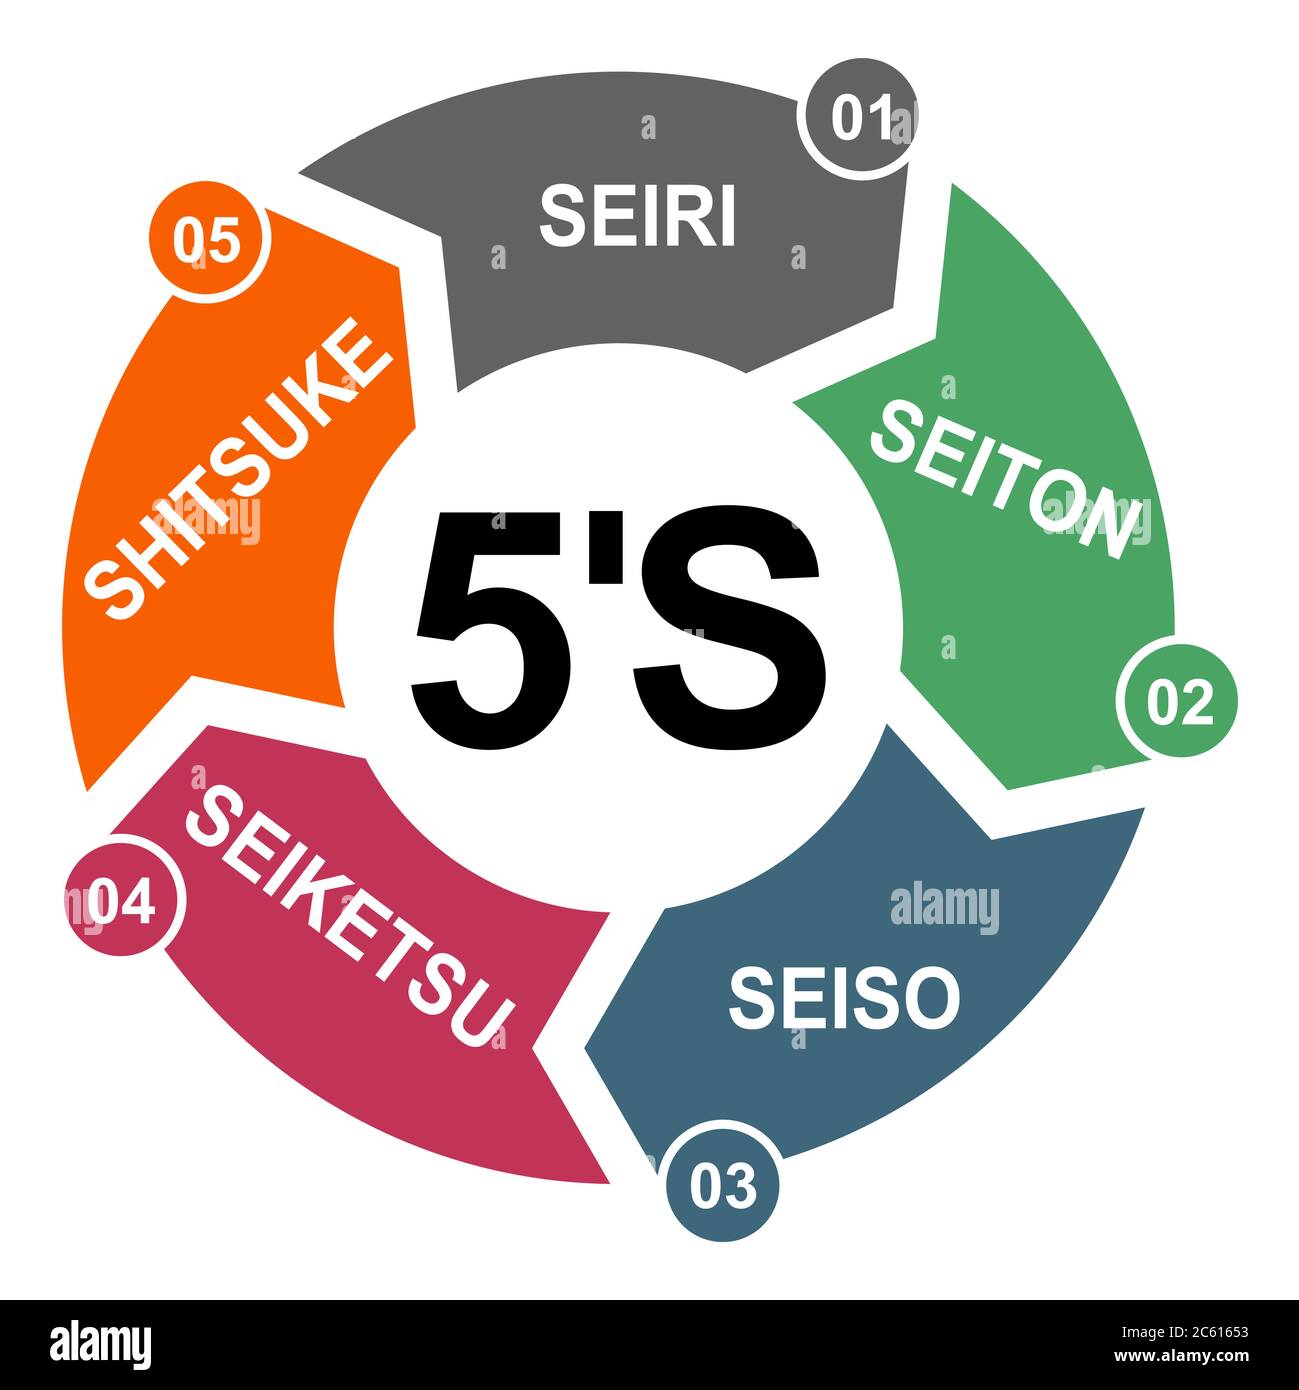 5S What Is 5S Methodology? Lean Manufacturing, Visual, 43% OFF